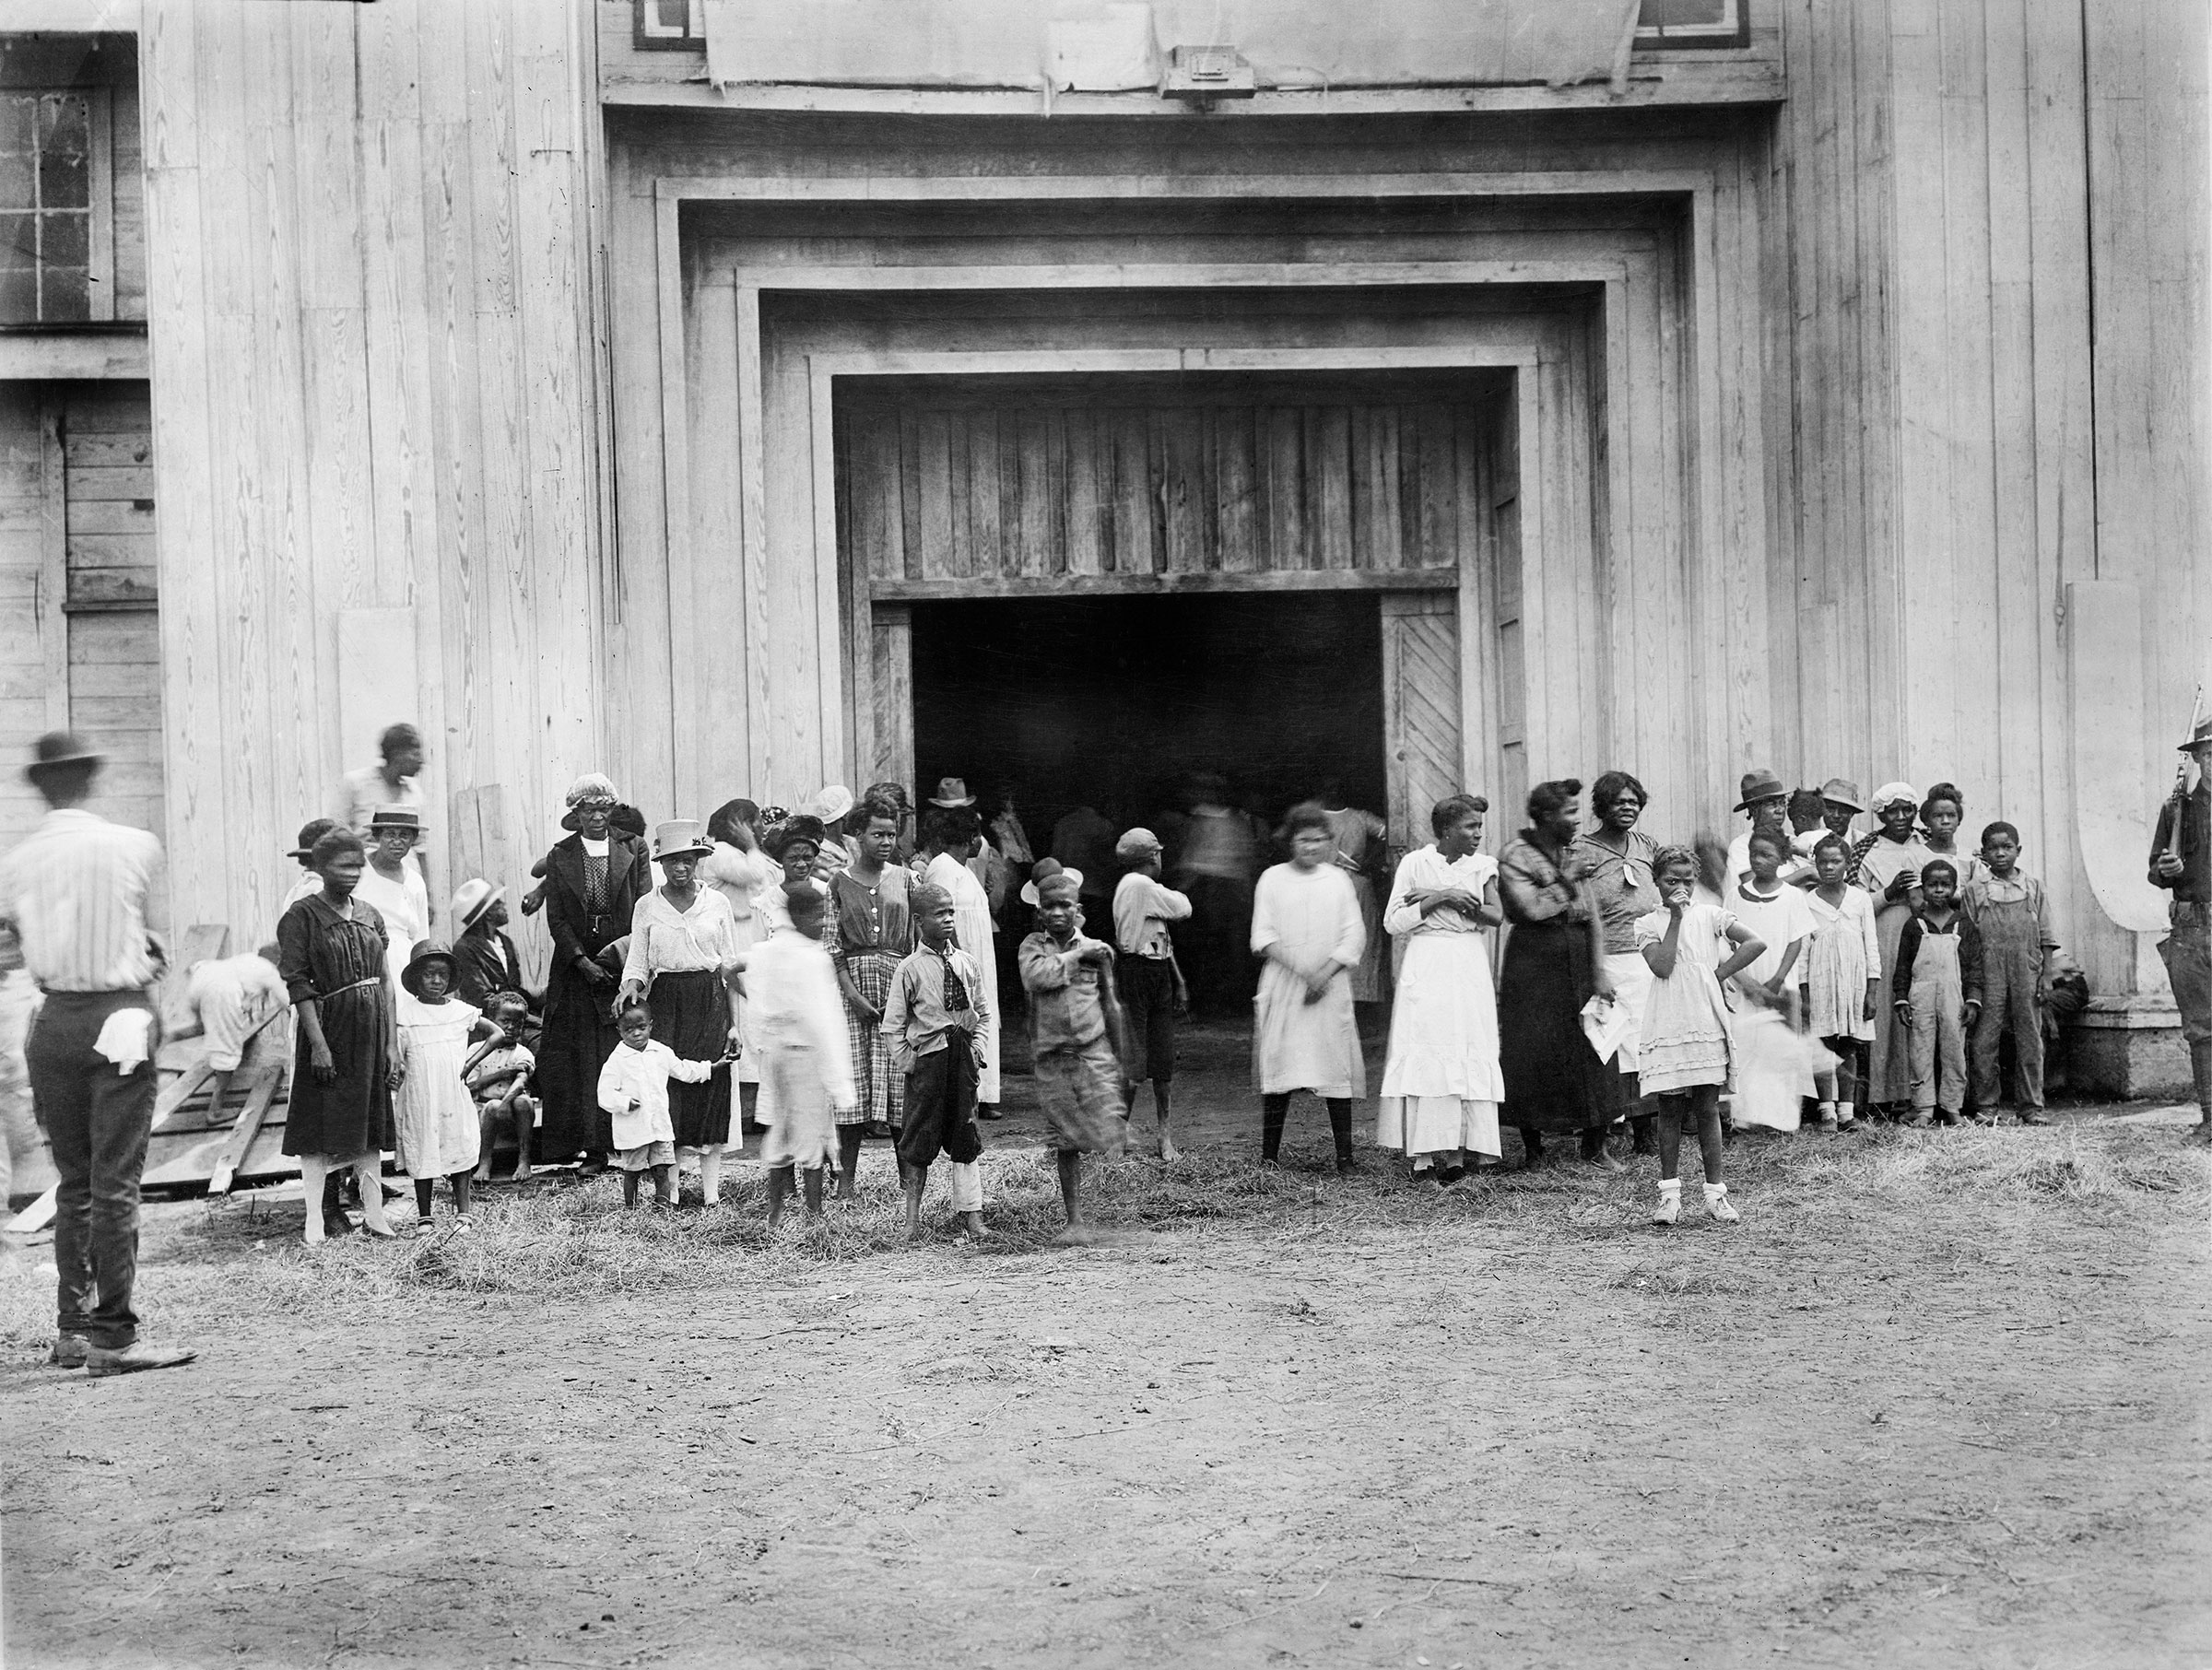 Entrance to a refugee camp on fair grounds in Tulsa, Okla., after the Tulsa Race Massacre, June 1921.